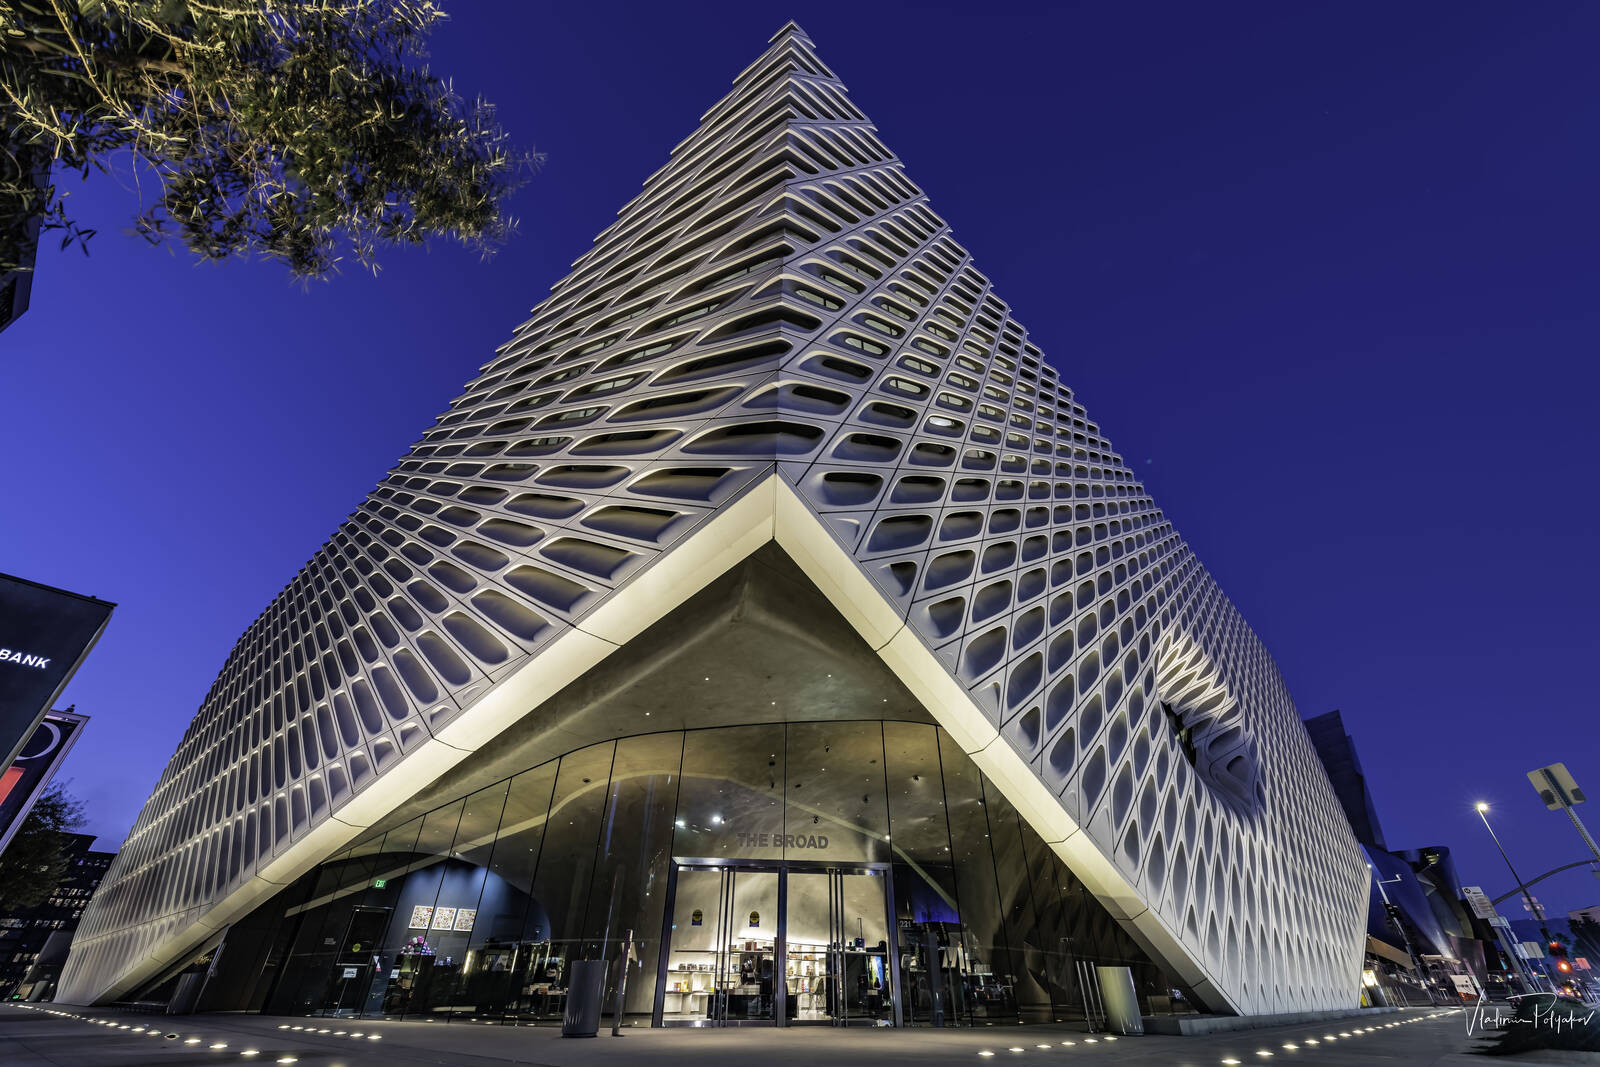 Image of The Broad Building by Vladimir Polyakov